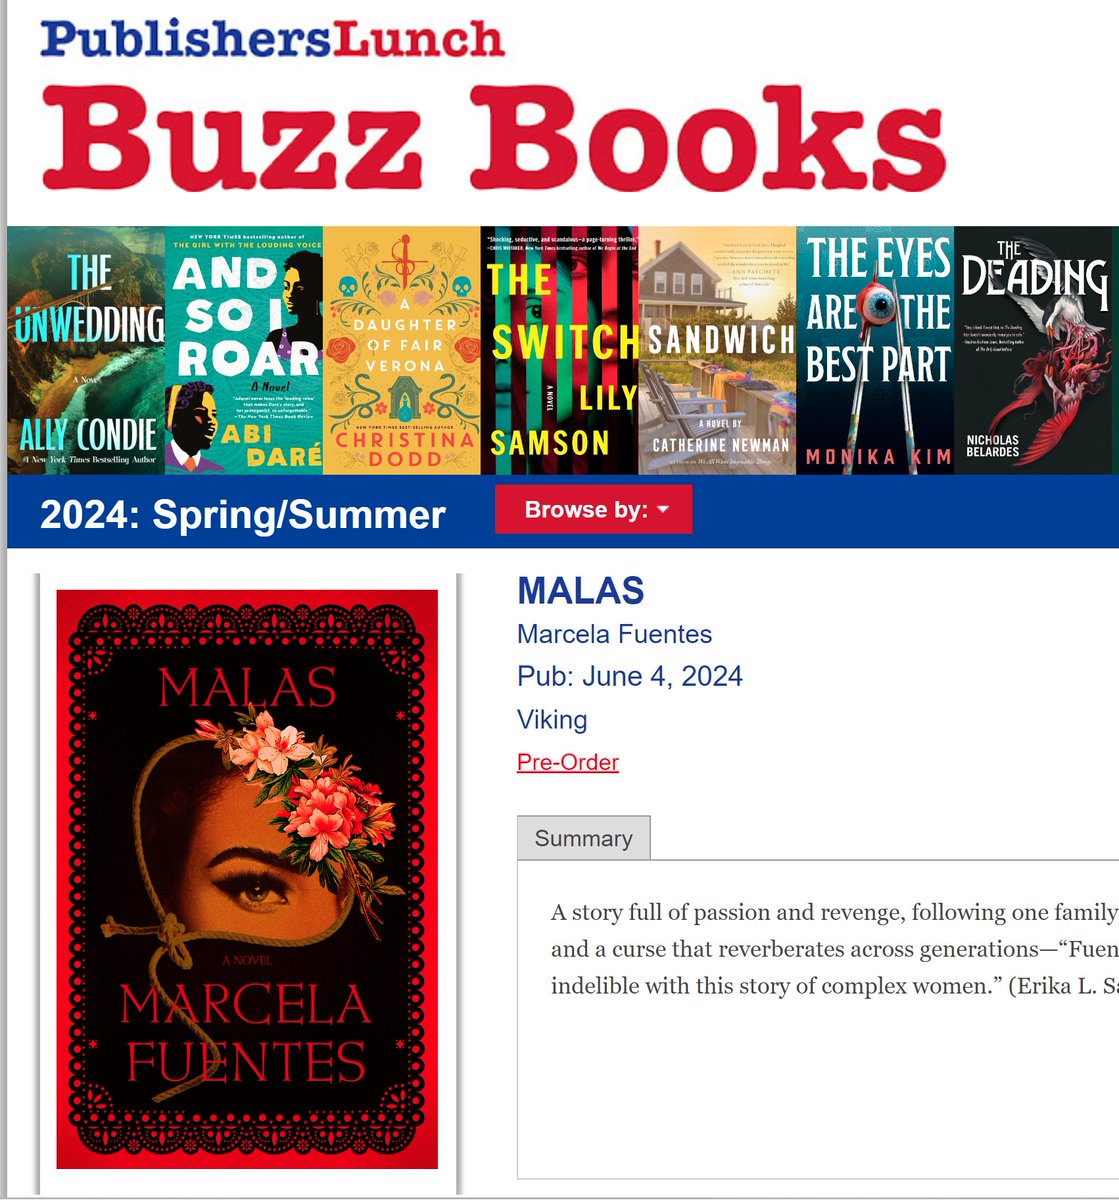 Malas is on the Publisher's Lunch Great Reads Spring/Summer Buzz Books list! buzz.publishersmarketplace.com/book/malas